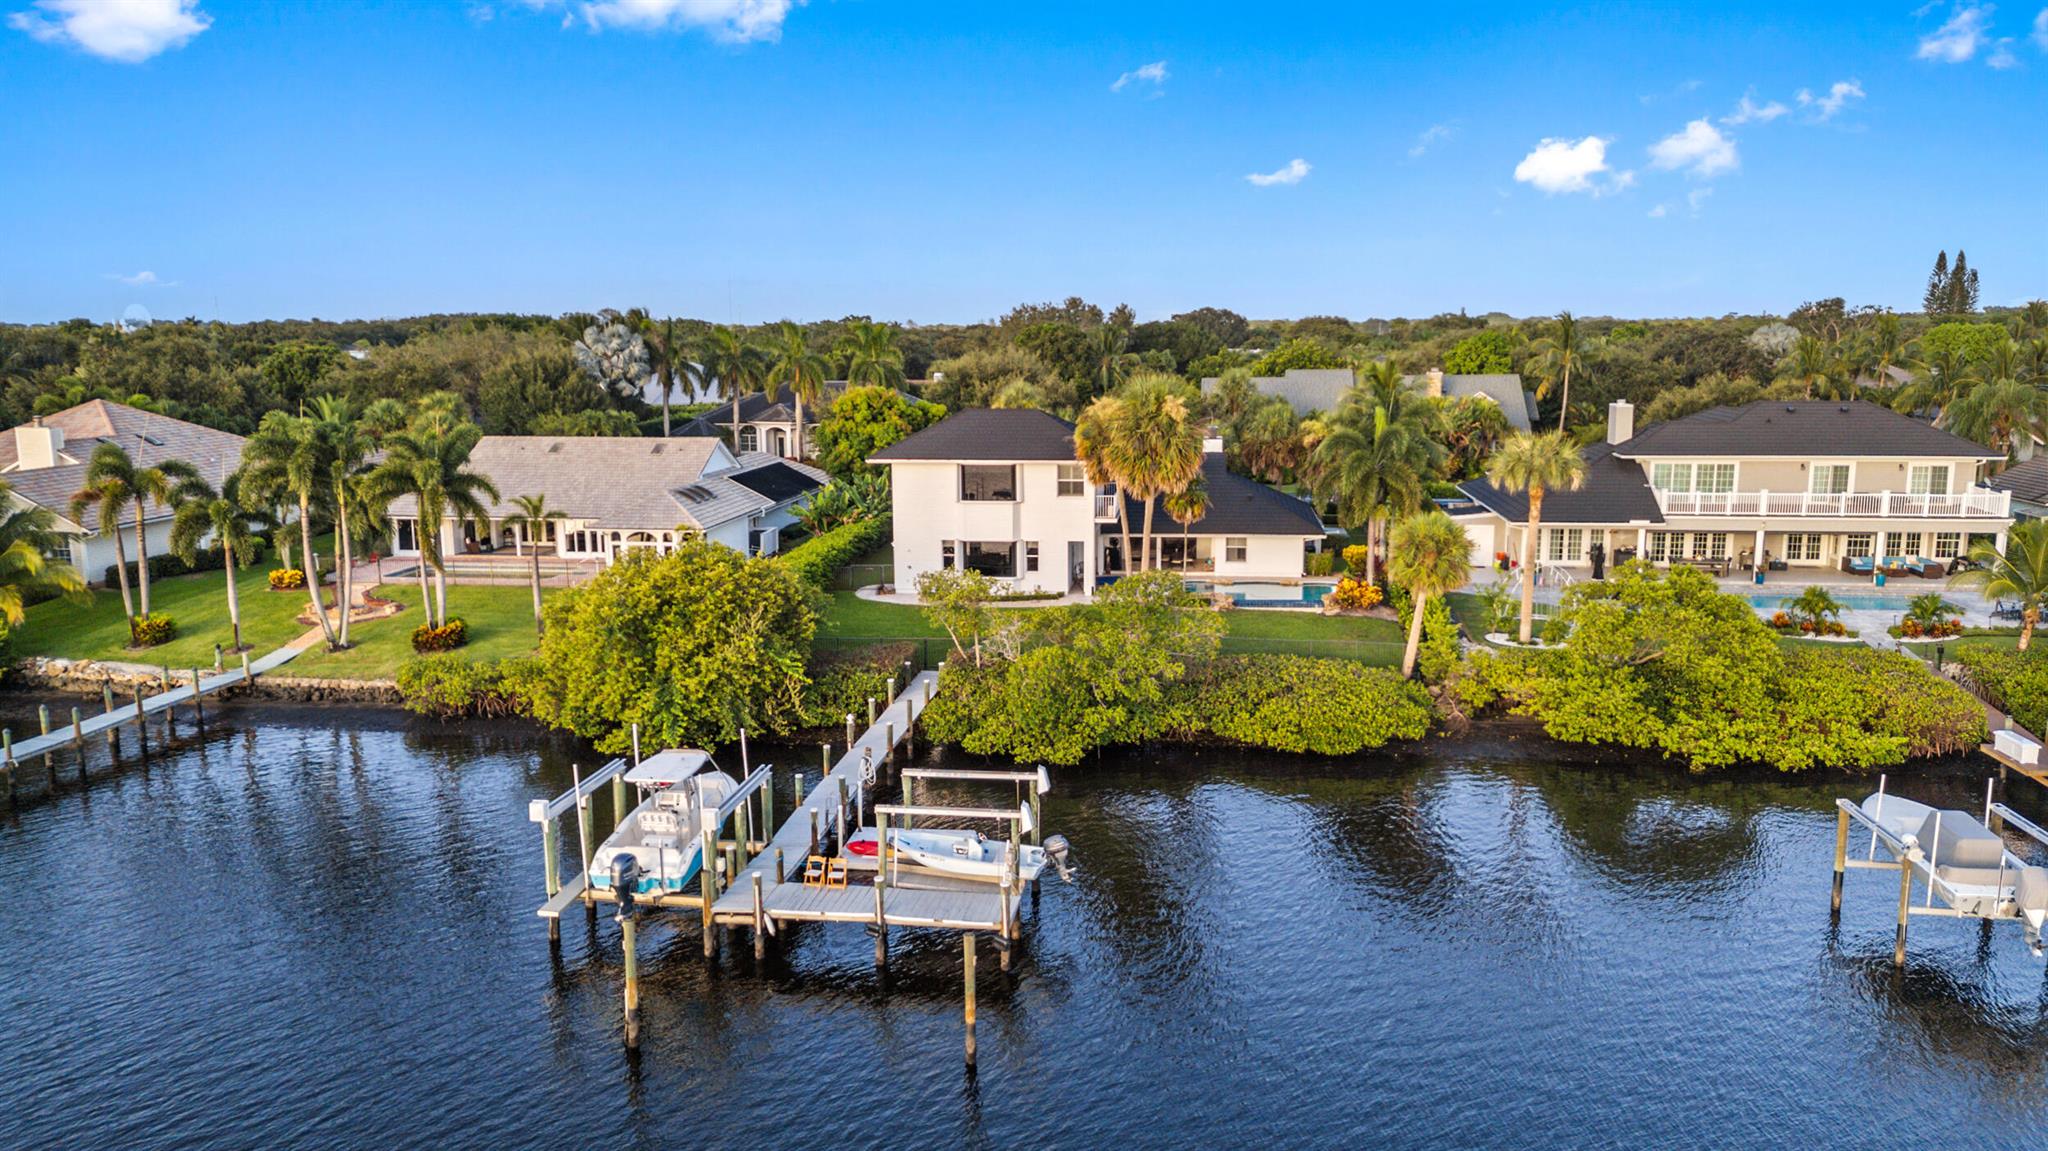 This coastal styled home is loaded with natural light and enjoys serene Loxahatchee River views with picturesque sunsets and beautiful reflections on the river at first light!The 16,000lb & 7000lb lifts will hold your boat or jet skis and are a scenic 15 minute ride to the Jupiter Inlet, a natural sandbar or a dozen quality restaurants.  The well maintained home includes these recent updates: new stone coated metal roof('23), all 3 ac units and upper level water heater ('22) , washer, dryer and pool pump ('21), tankless water heater, pool heater and all kitchen appliances ('16&'17). Porcelain tile throughout main floor, cozy semi private bar room with wet bar, wine cooler and kegerator.